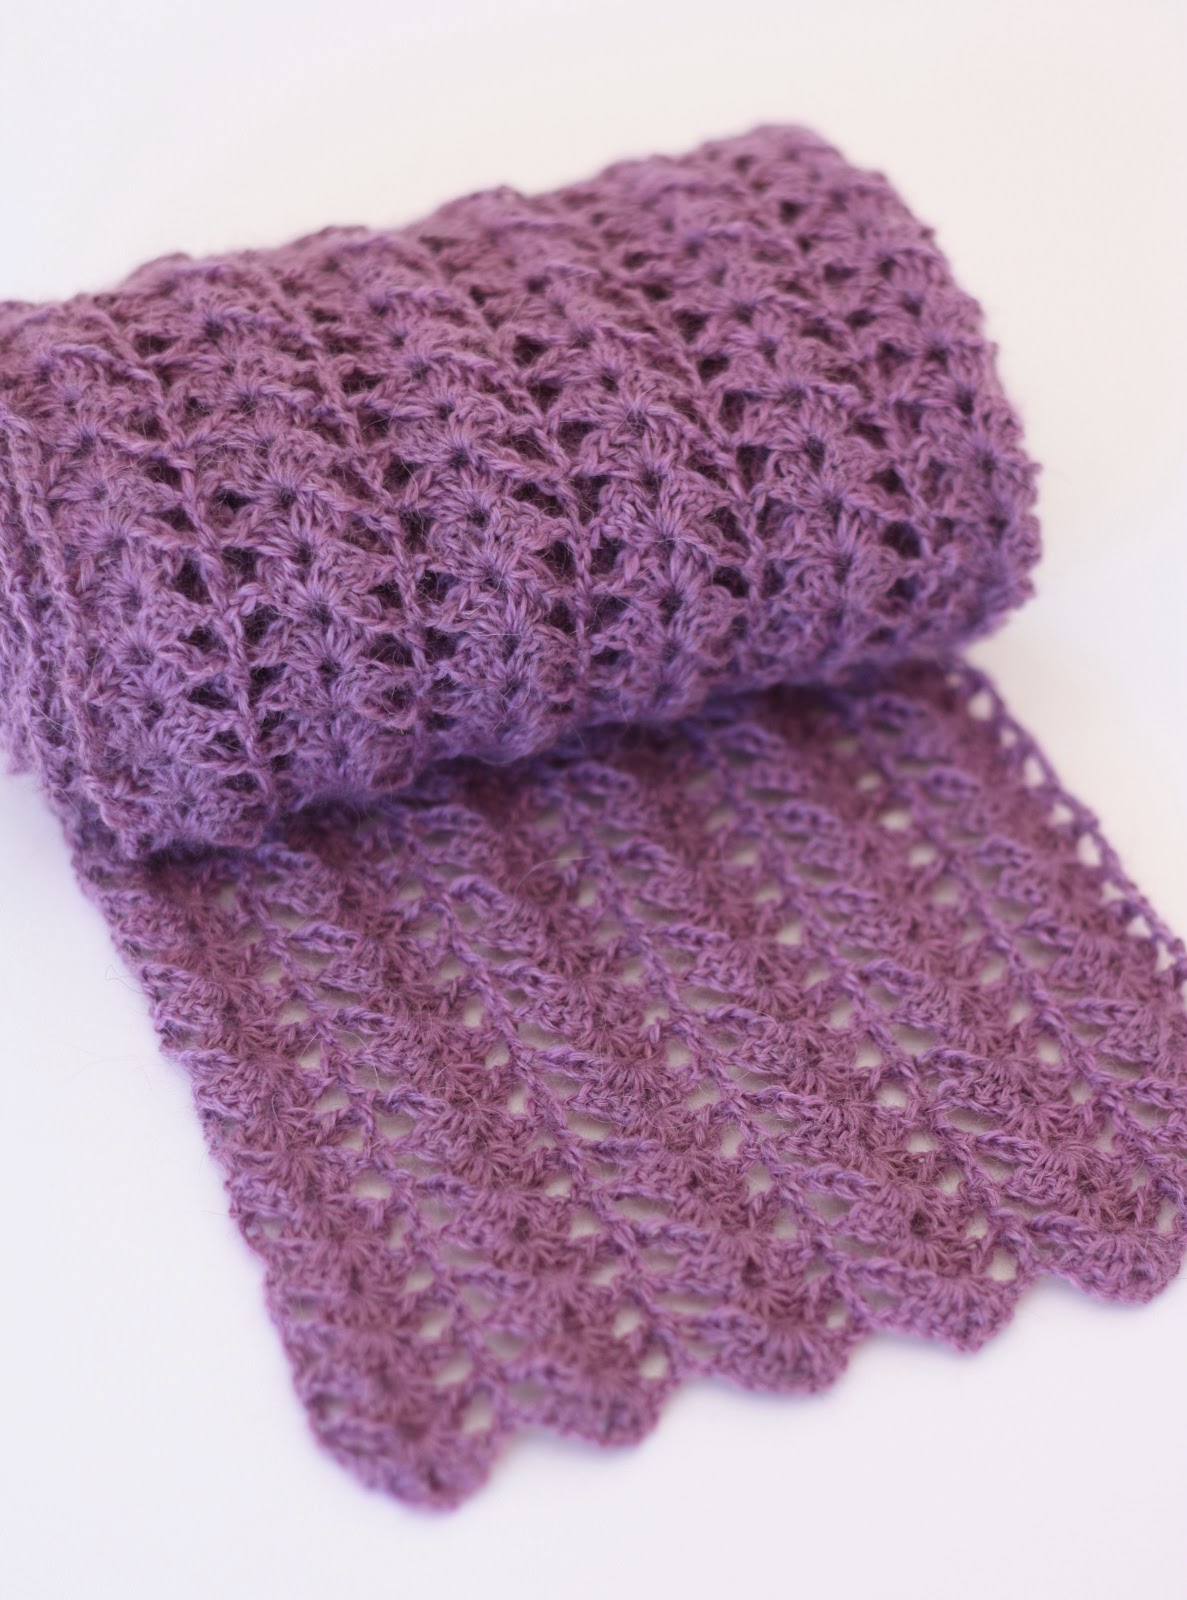 Crocheted Scarf Free Pattern A Spoonful Of Sugar